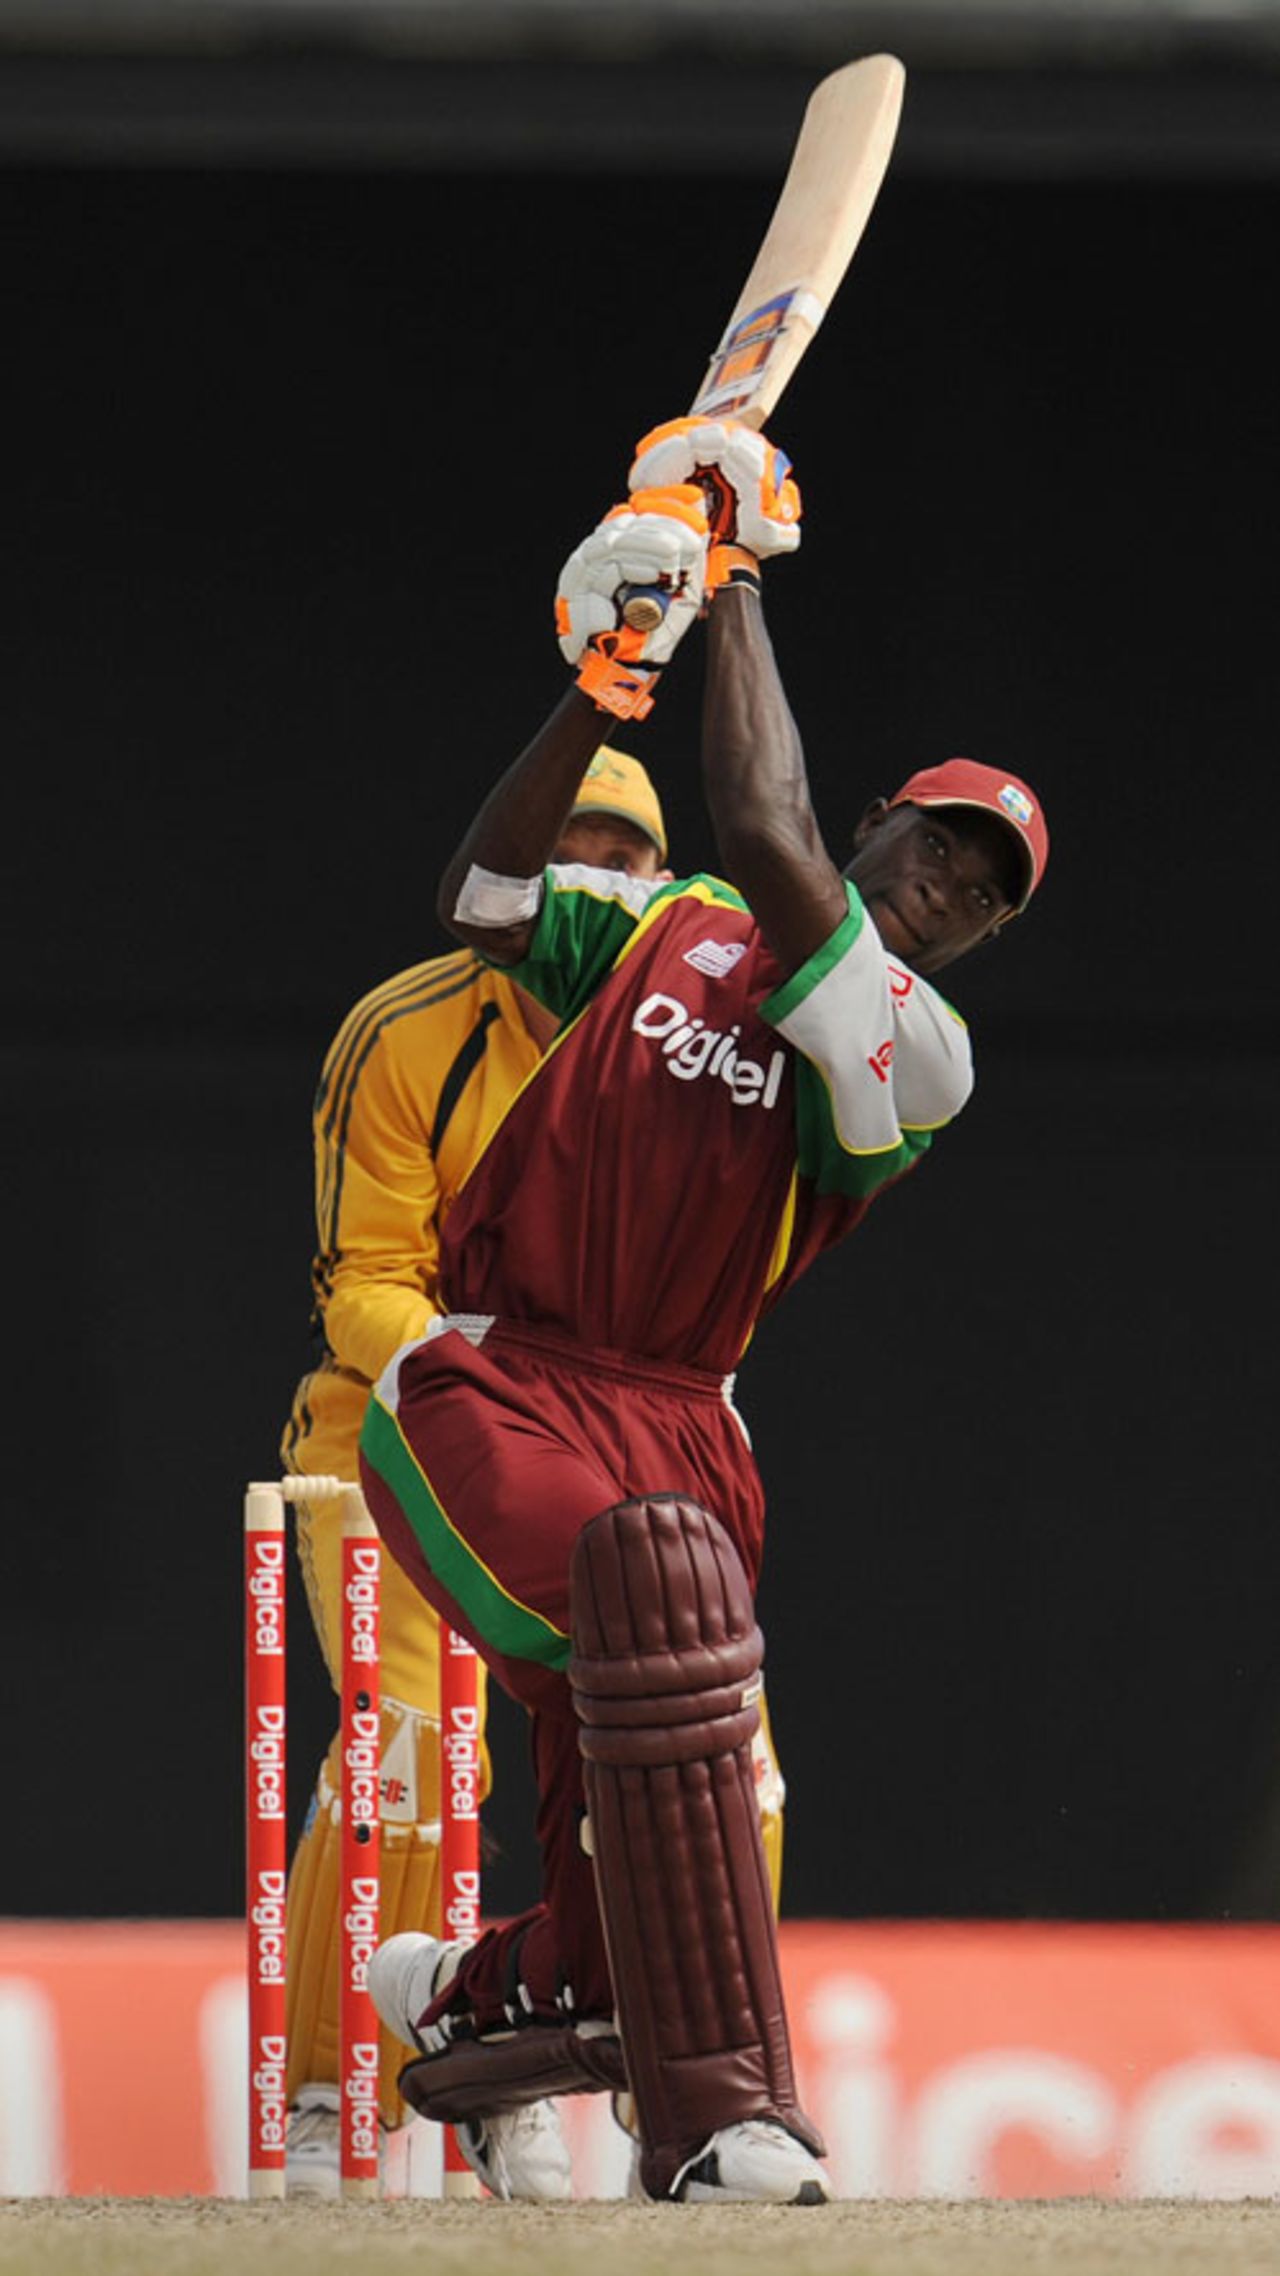 Shawn Findlay drives on his way to 59, West Indies v Australia, 5th ODI, St Kitts, July 6, 2008